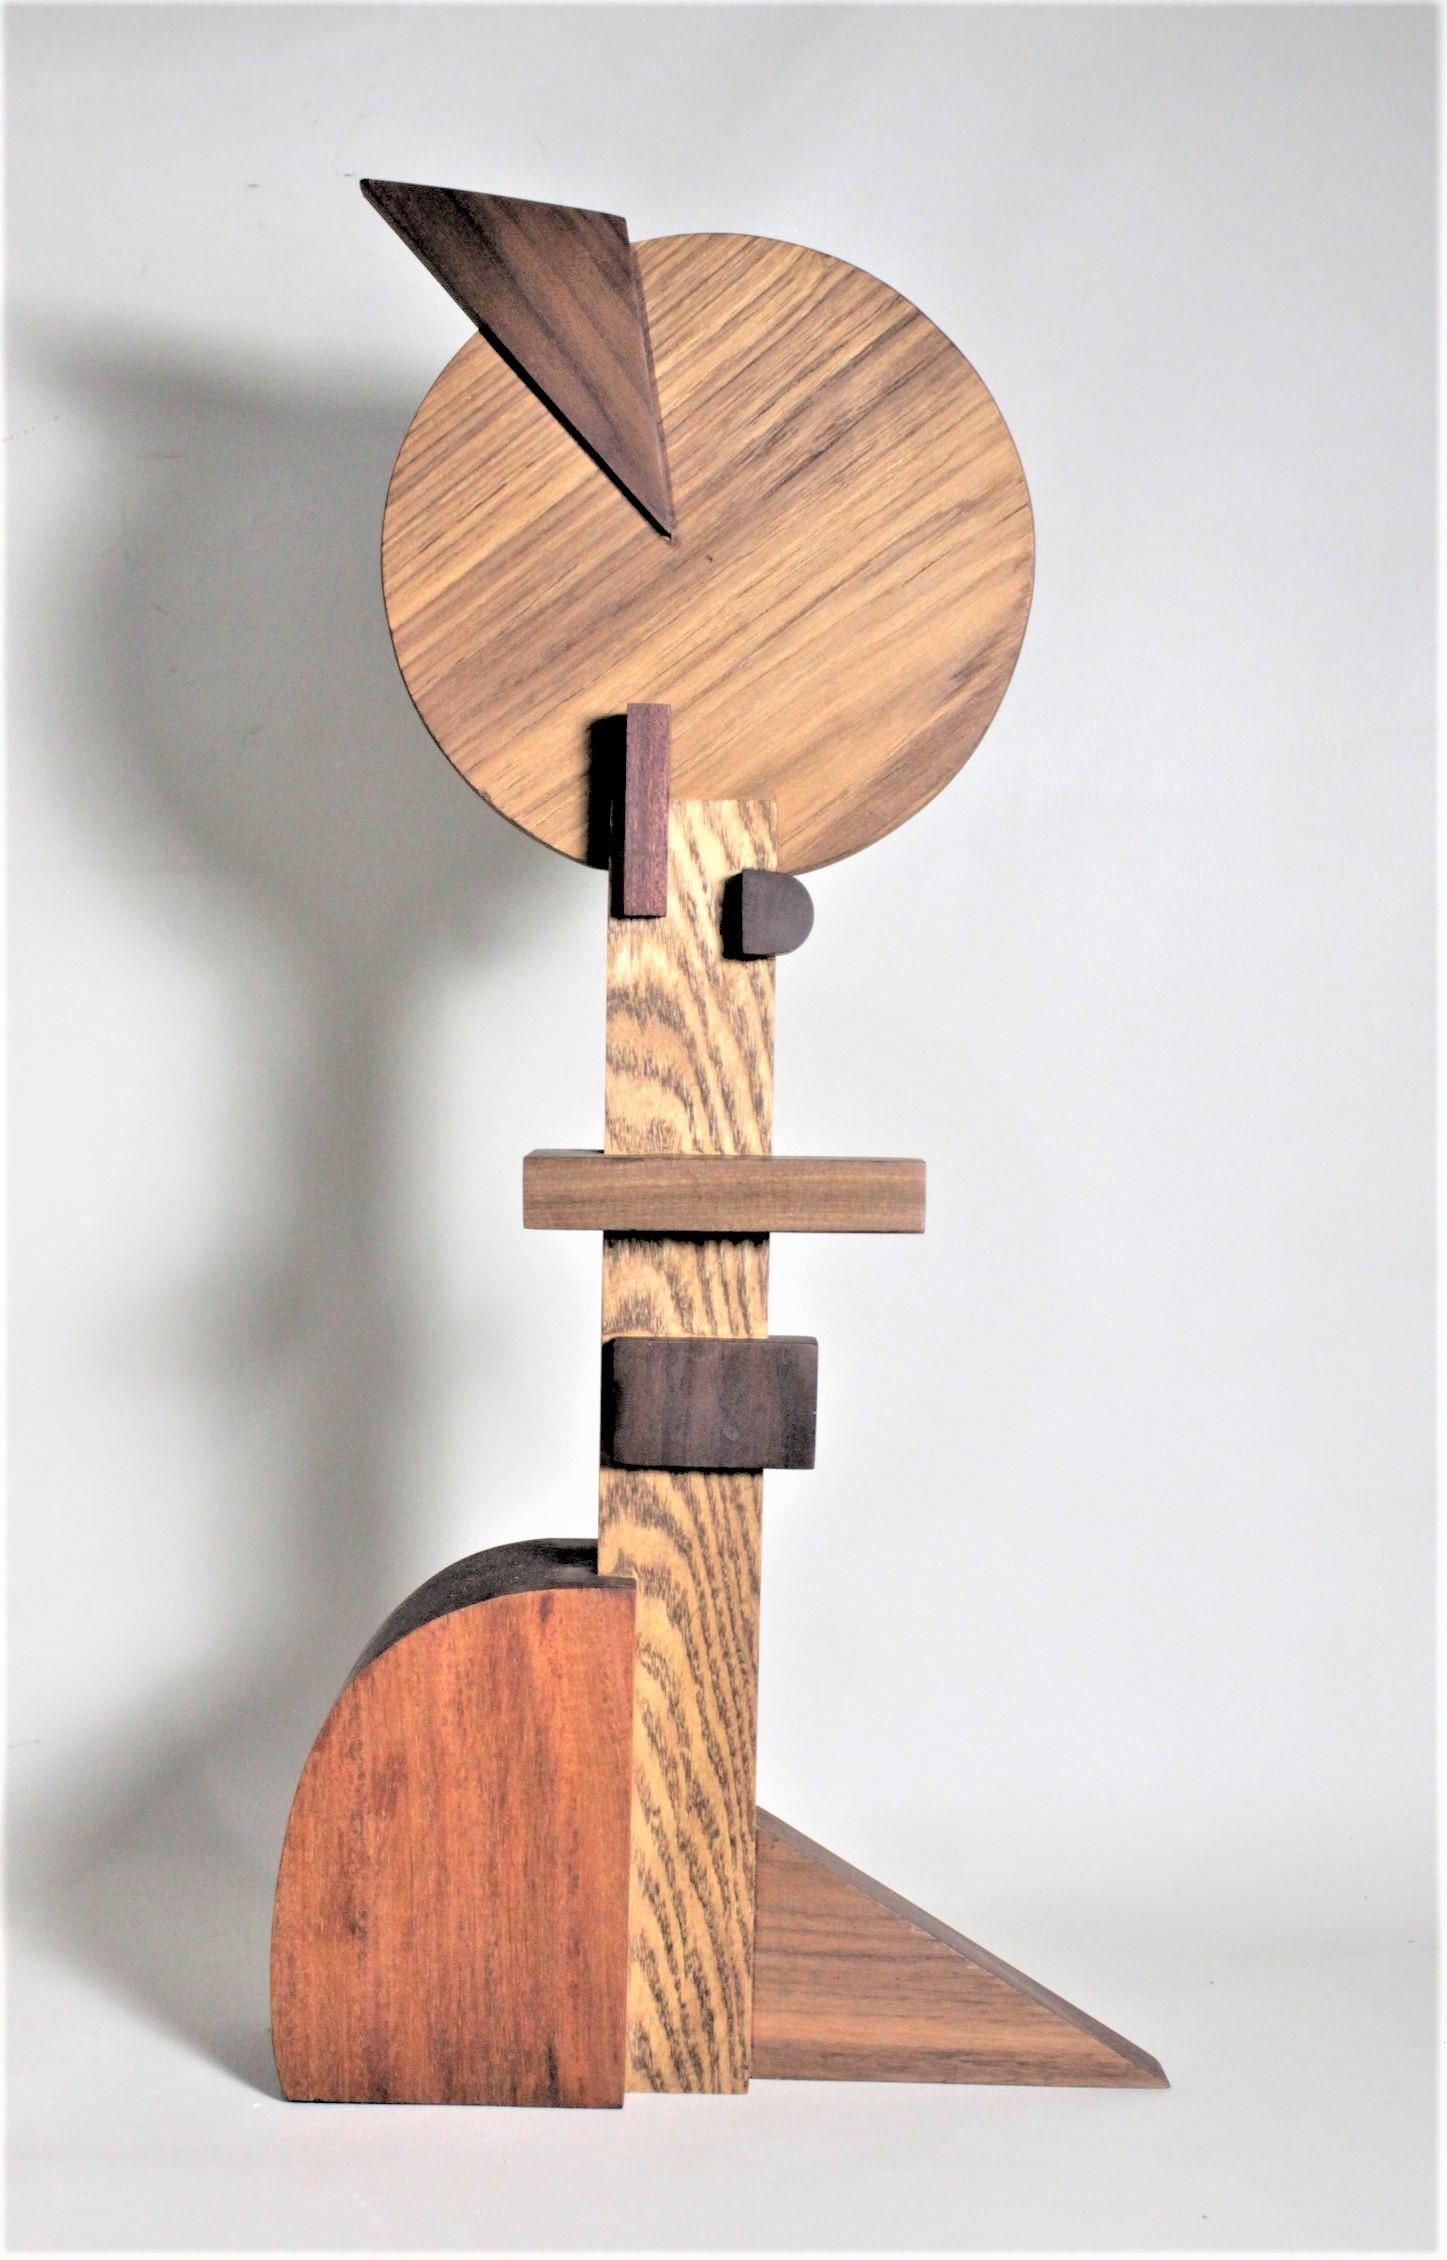 This contemporary abstract wooden sculpture was done by Czeslaw Budny a Polish-Canadian artist in the constructivist style in circa 2010. This sculpture was made entirely of up-cycled, reclaimed wood from a variety of sources and utilizes the